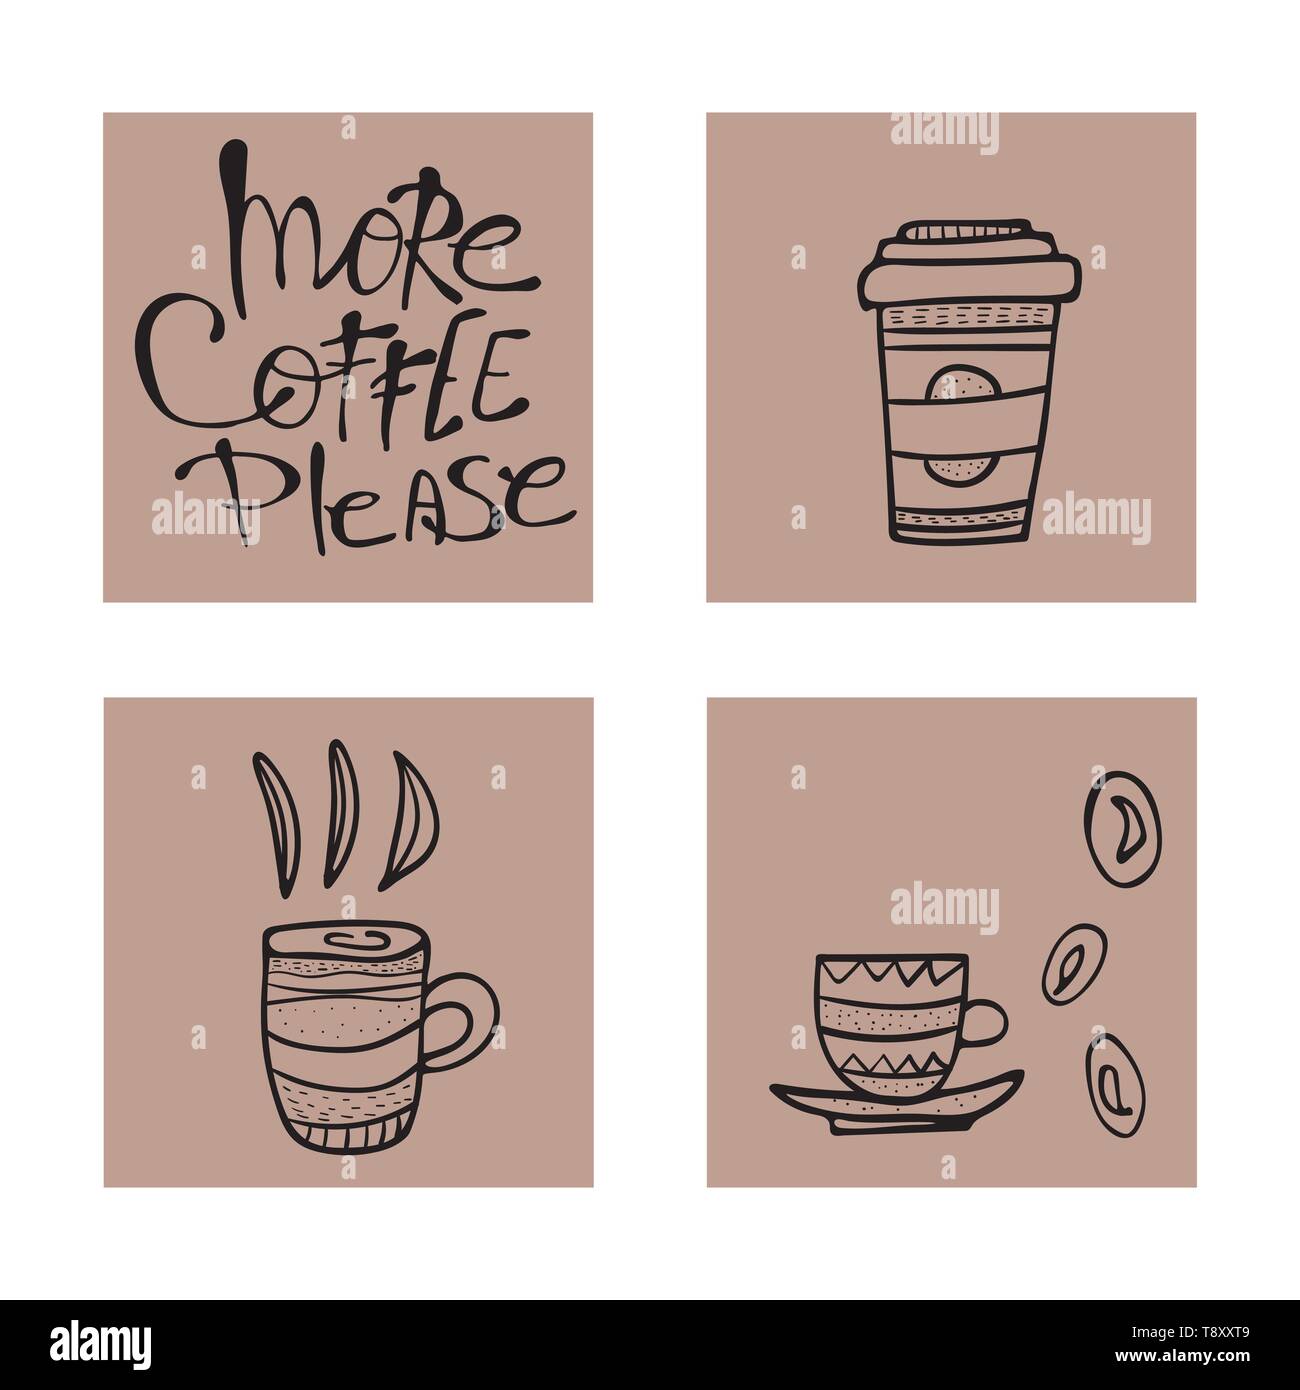 More coffe please lettering with mugs cards. Set of cups with hot beverage in doodle style. Poster template. Vector illustration. Stock Vector